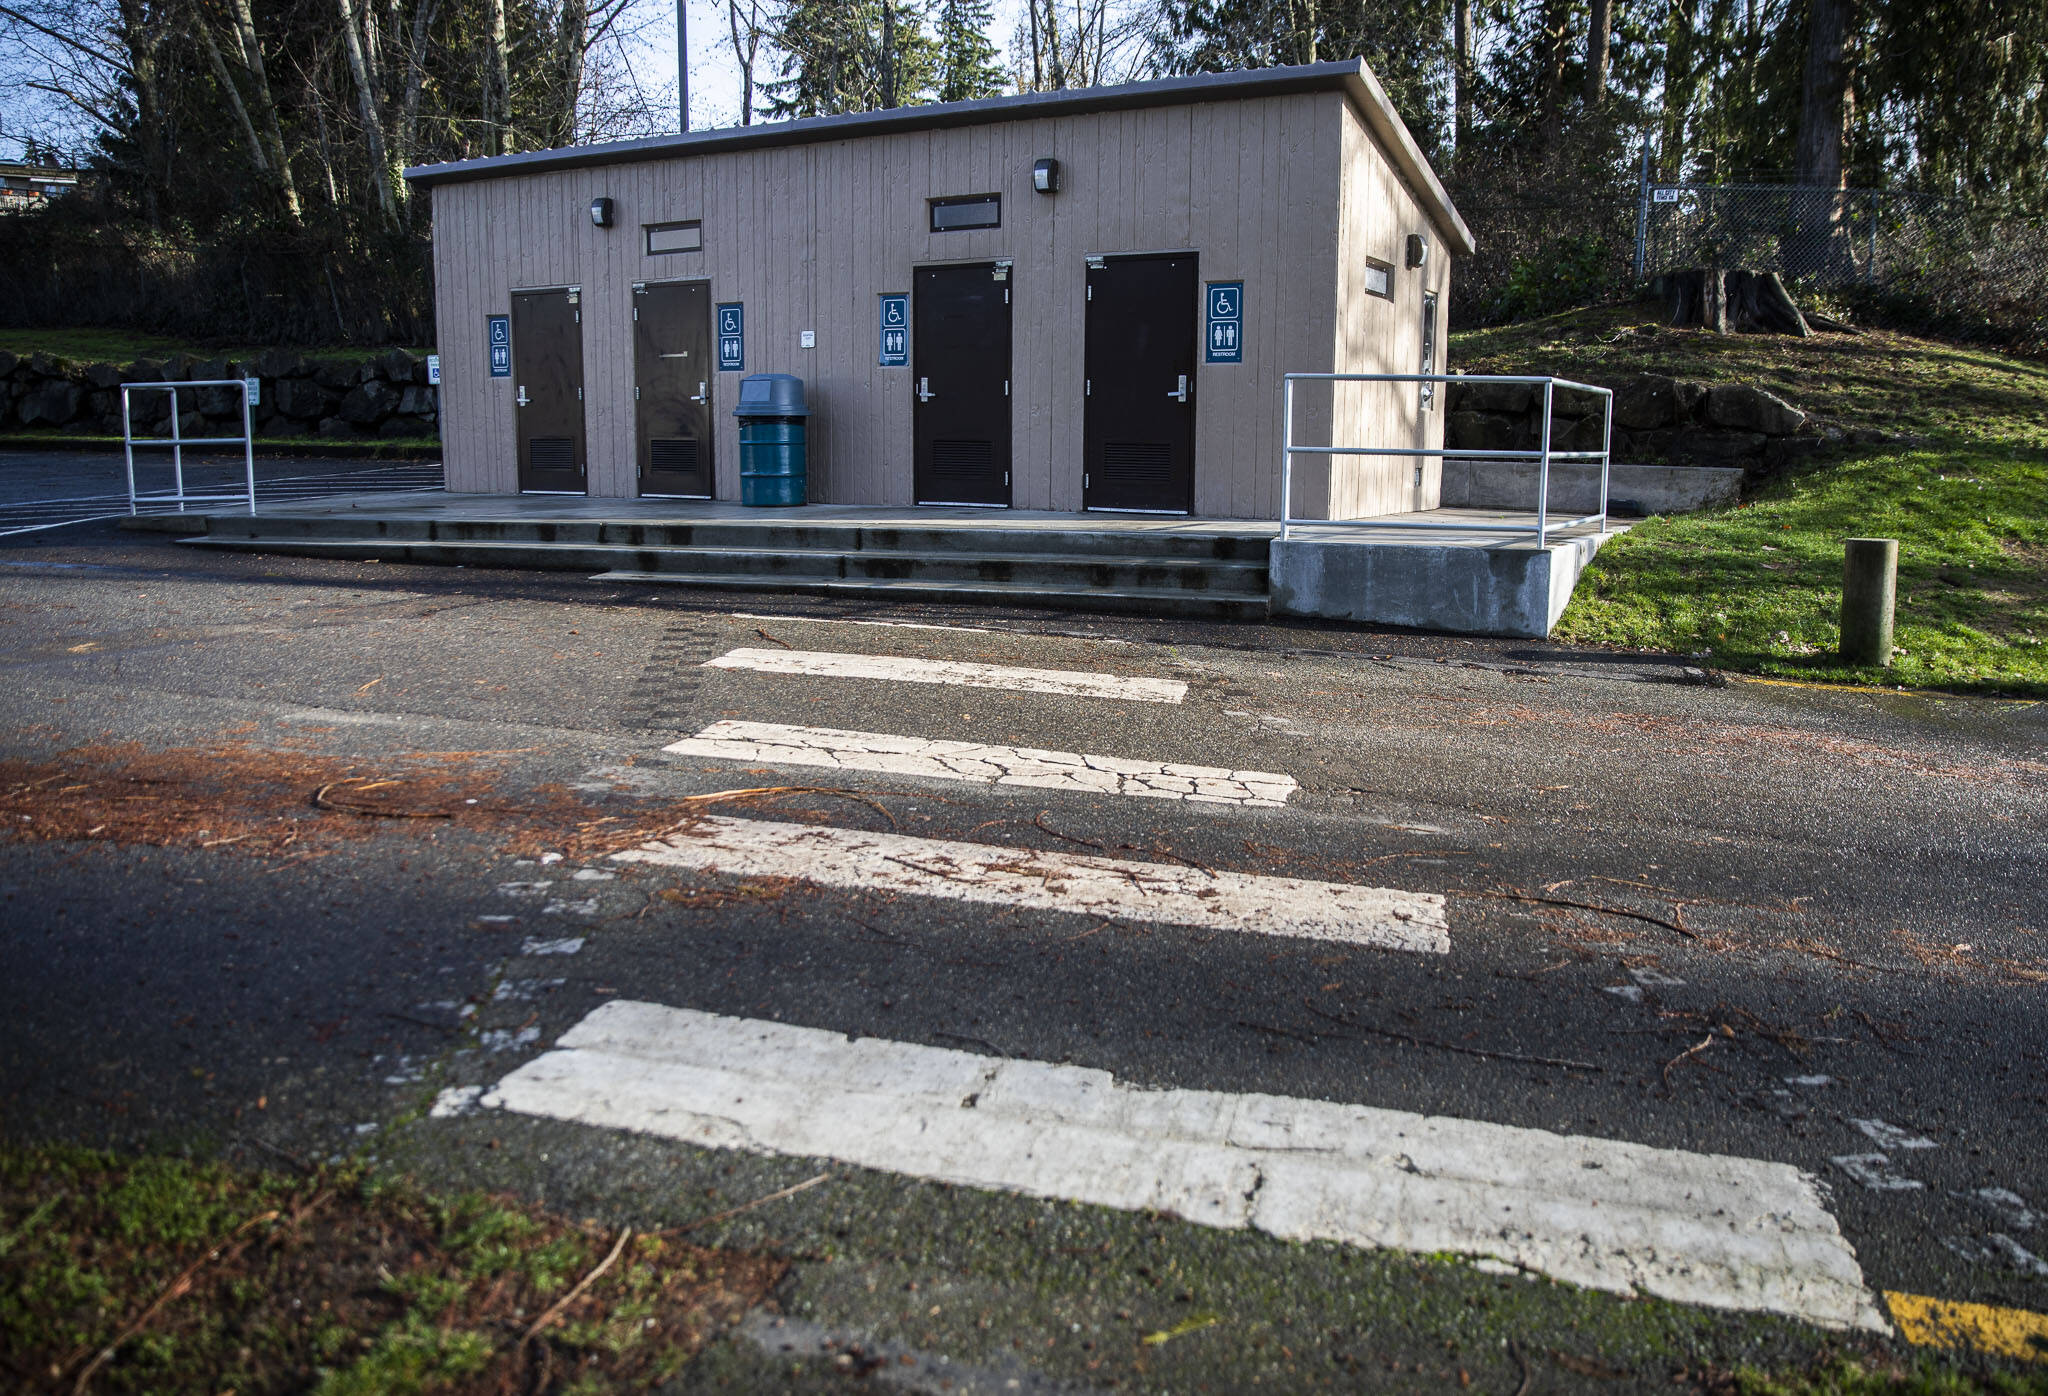 New bathrooms opened in early 2022 at Ballinger Park near the boat launch and fishing pier in Mountlake Terrace. (Olivia Vanni / The Herald)